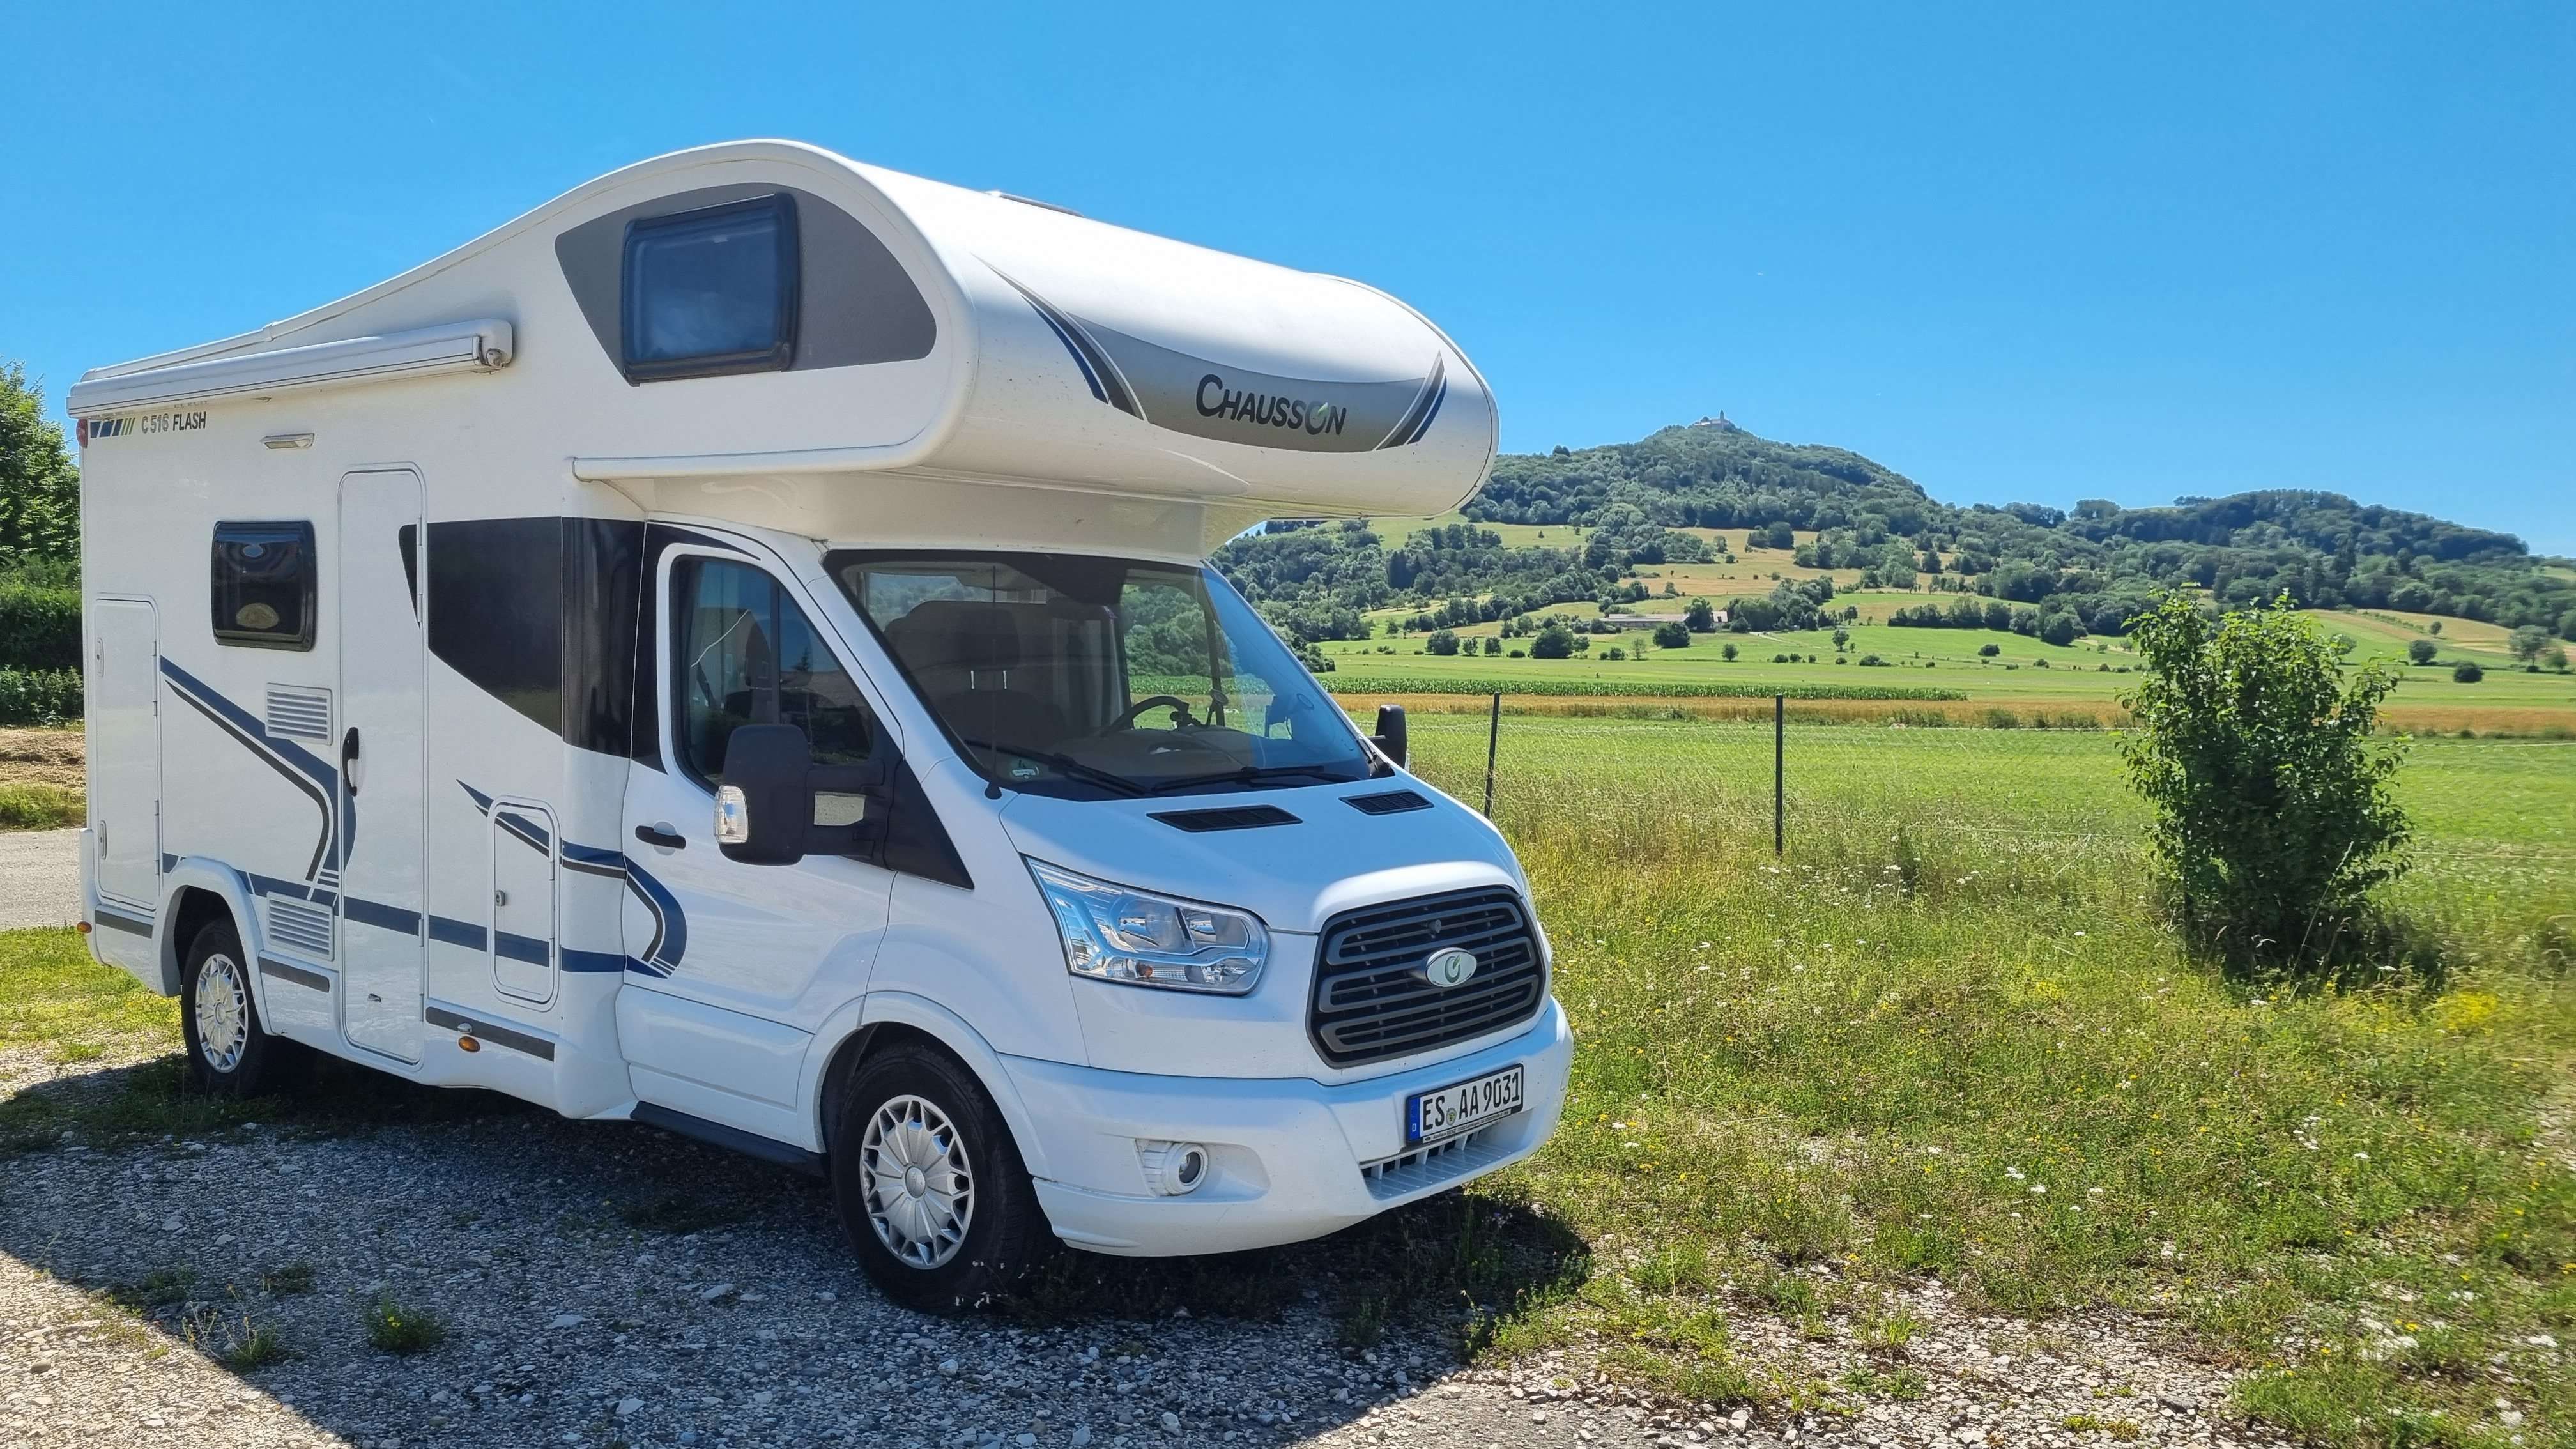 Caravans-Wohnm Chausson Other in White used in Kirchheim Teck for € 42,000.-